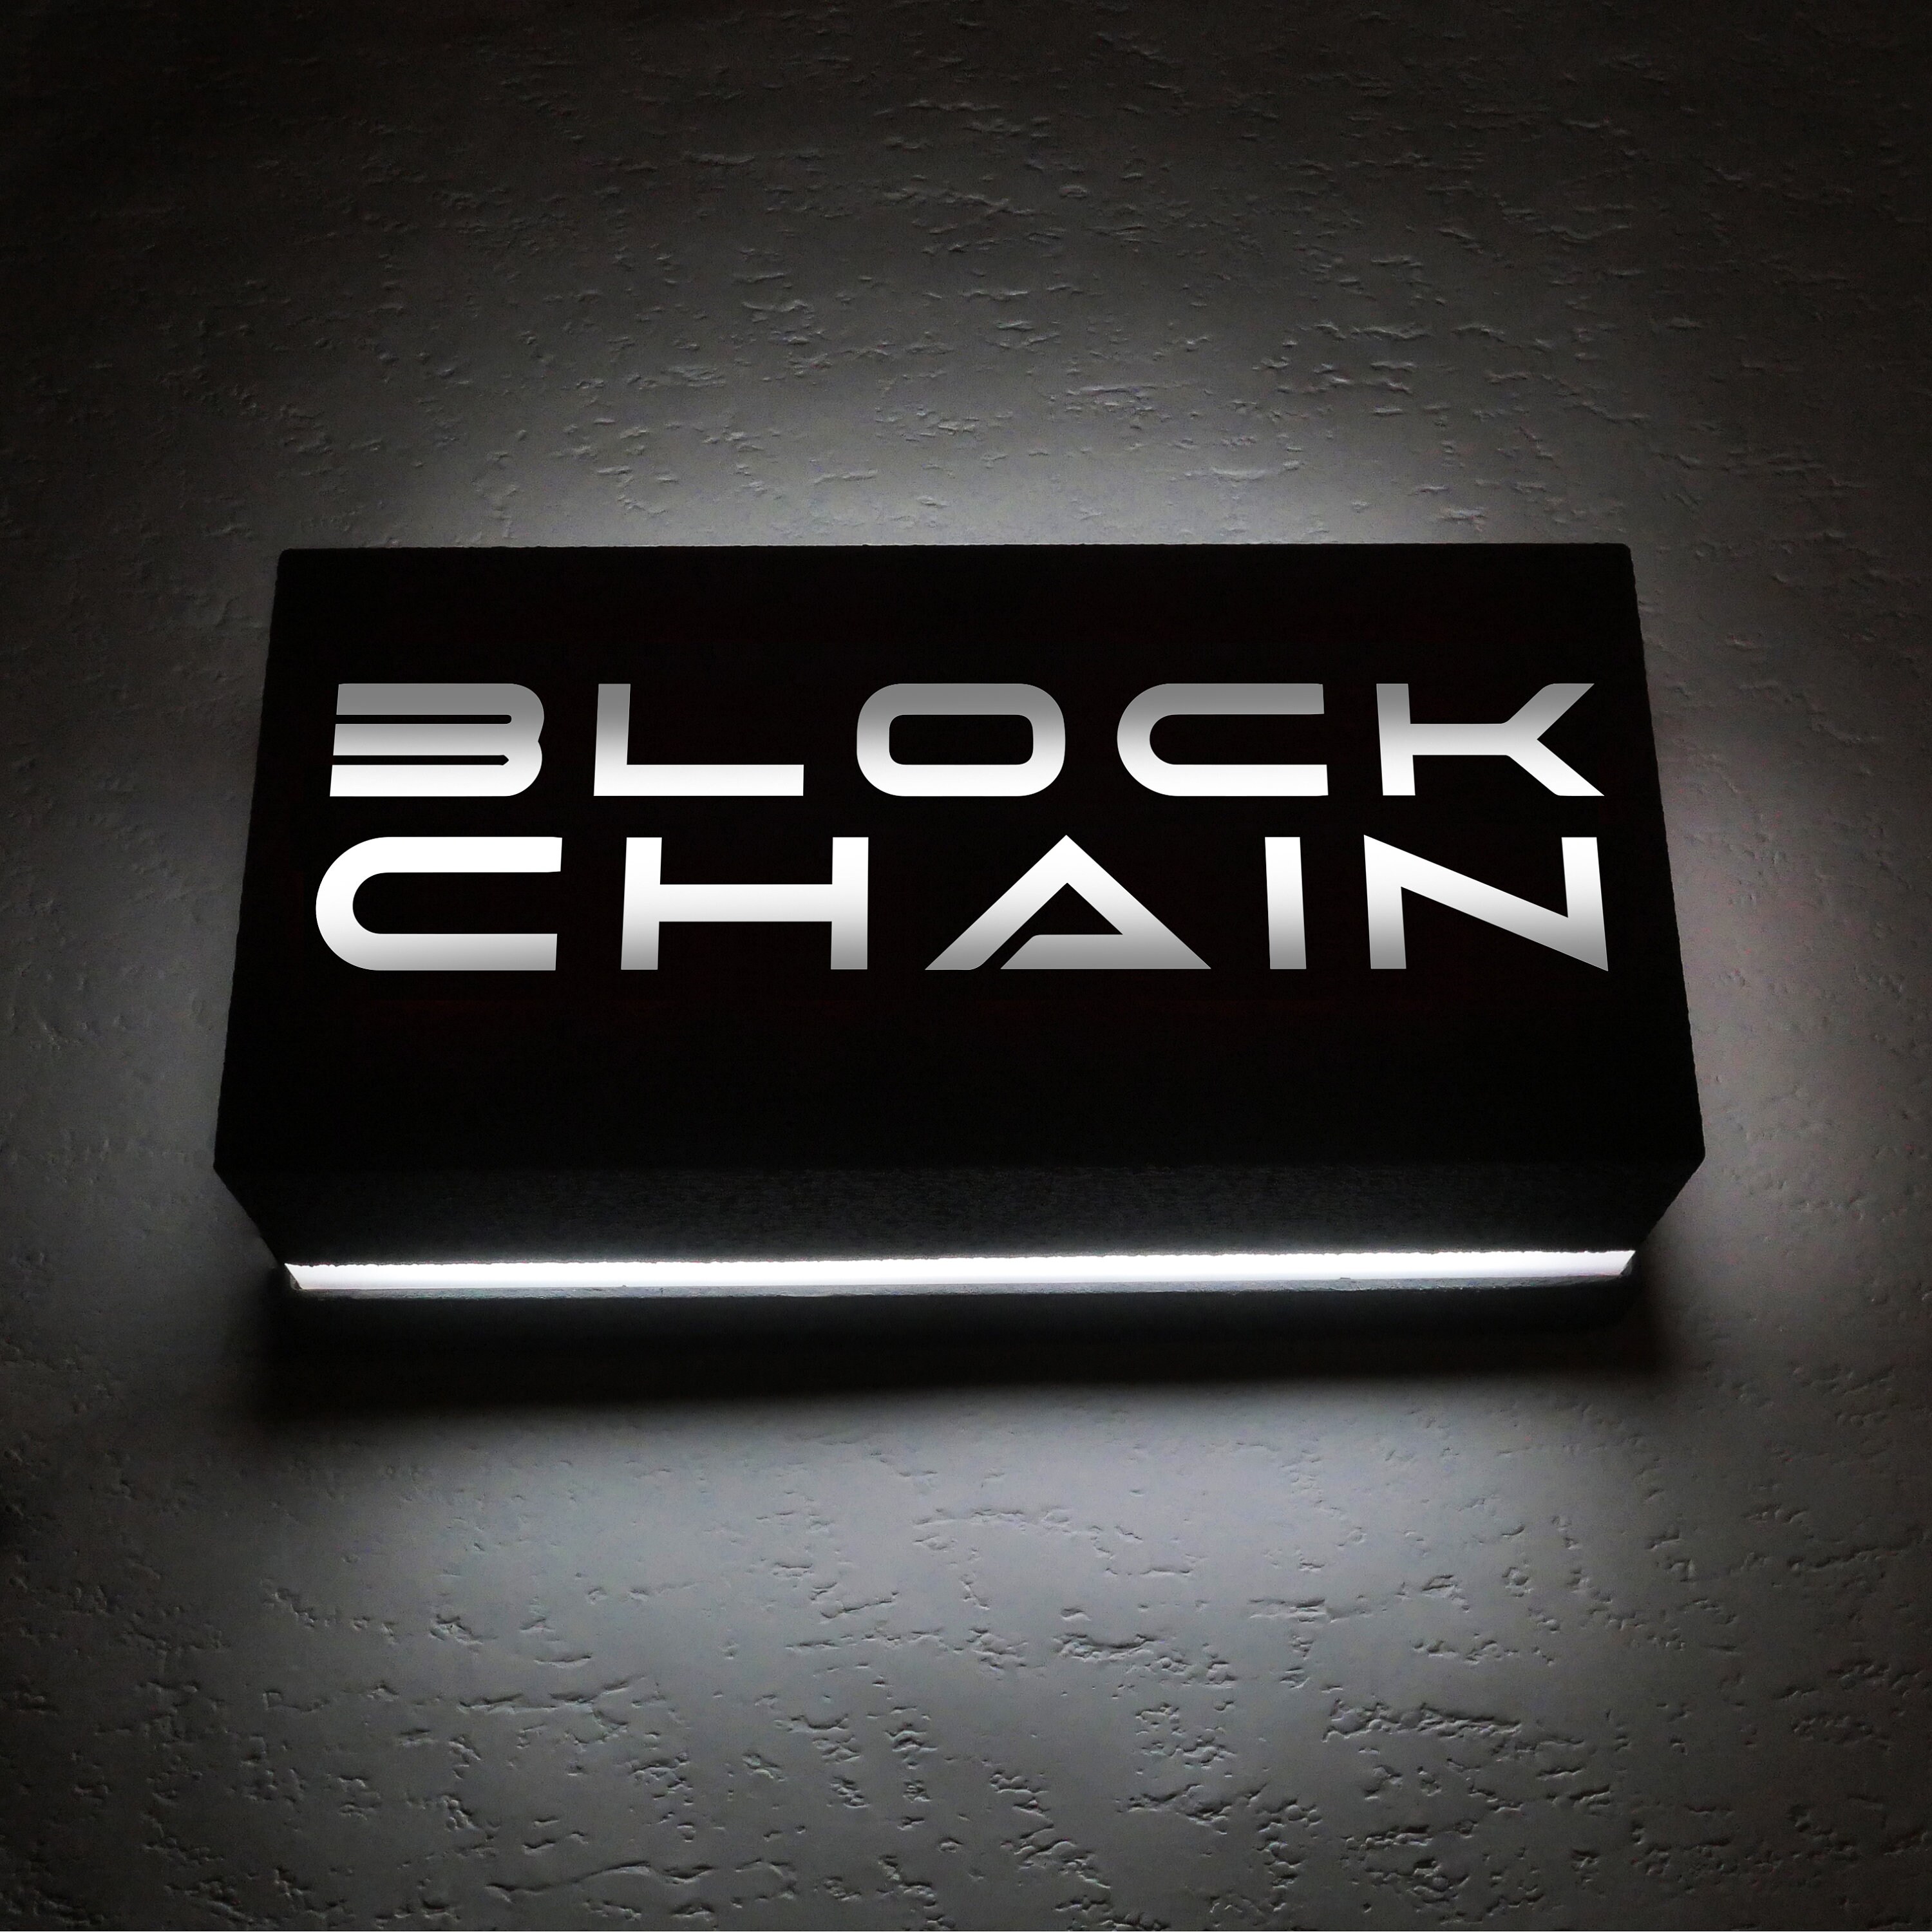 Blockchain Sign Led Wall Night Light Lampe d'ambiance Eclairage Applique Murale